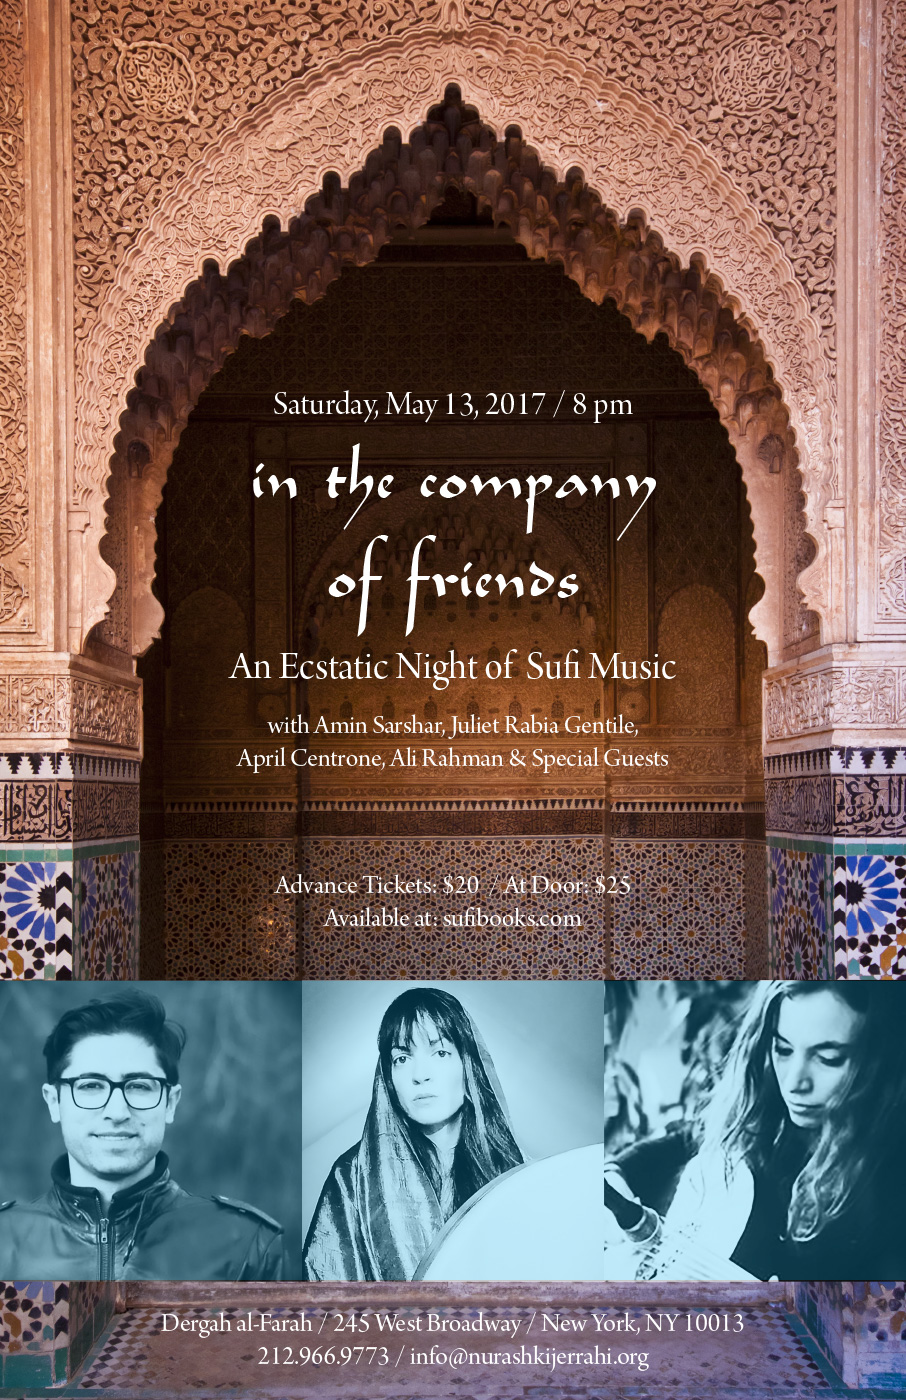 Saturday, May 13, 2017 | In the Company of Friends – An Ecstatic Night of  Sufi Music with Amin Sarshar, Juliet Rabia Gentile,  April Centrone, Ali Rahman & Special Guests | 8:00 PM | Advance Tickets: $20  | At Door: $25